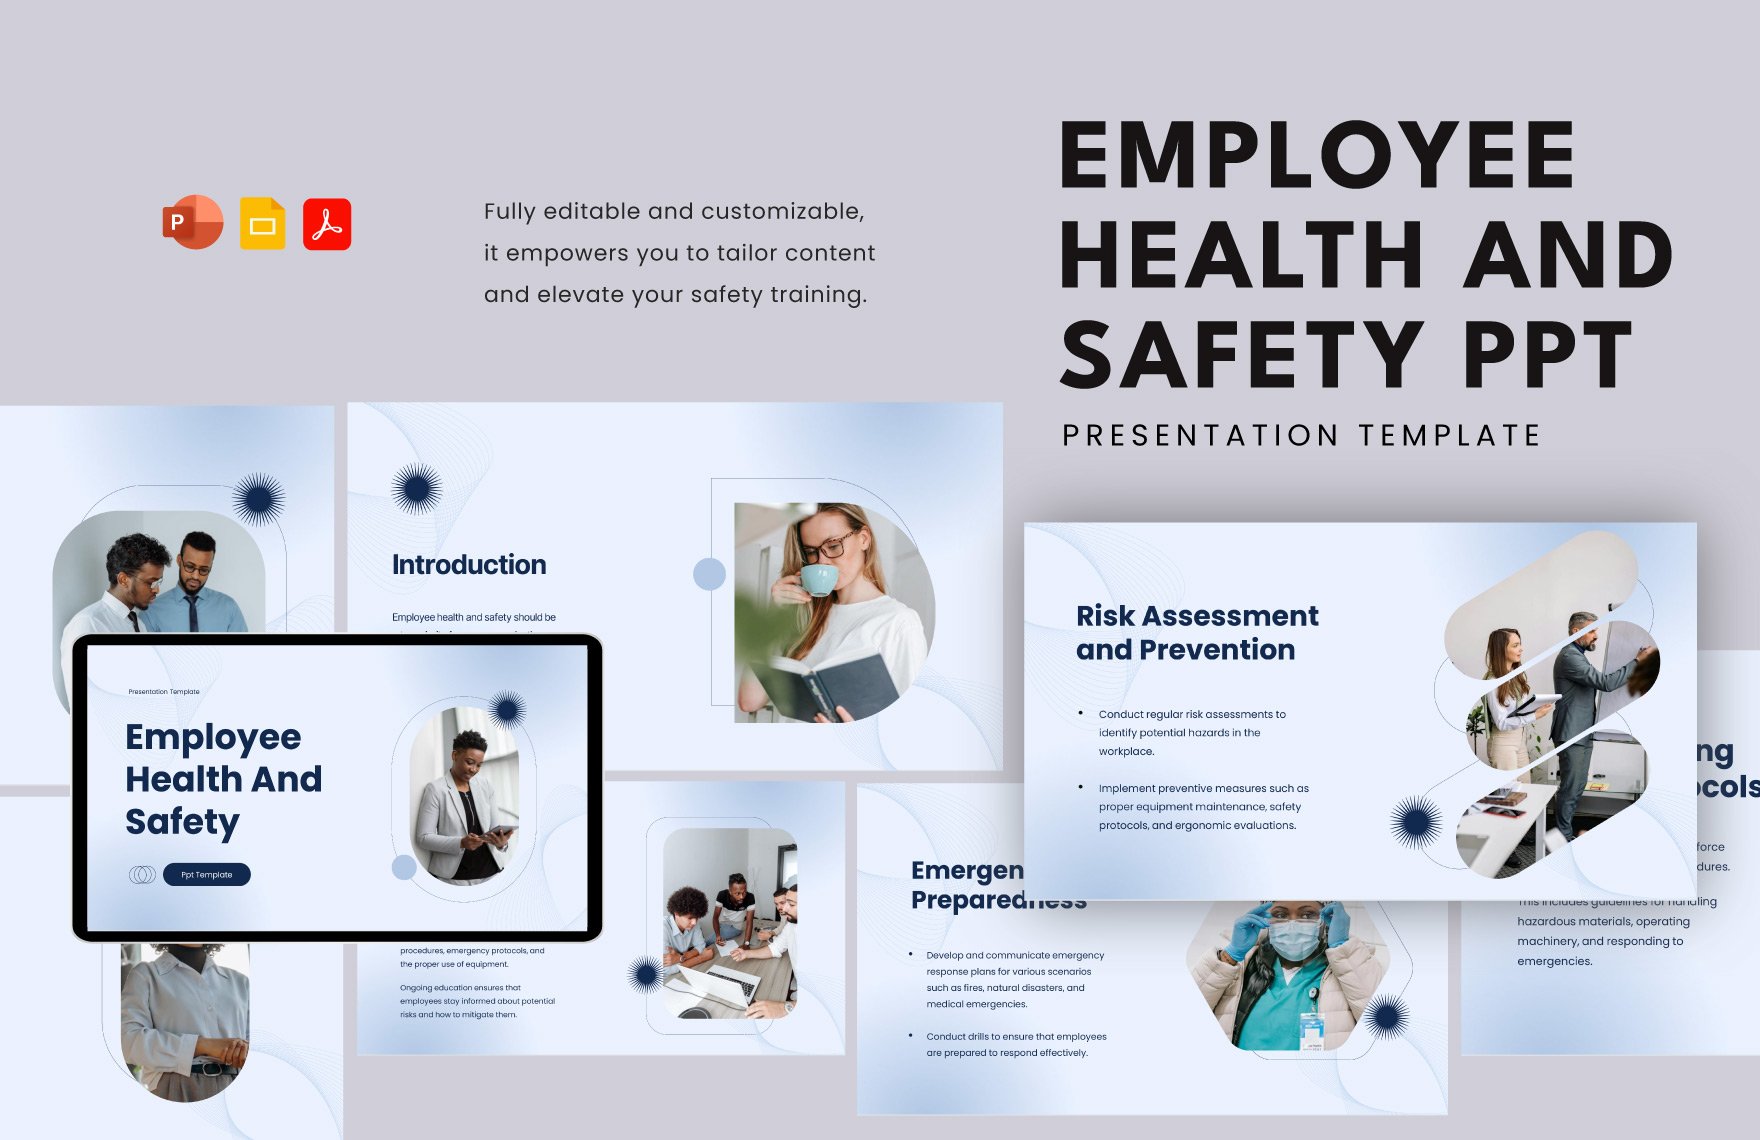 Employee Health and Safety PPT Template